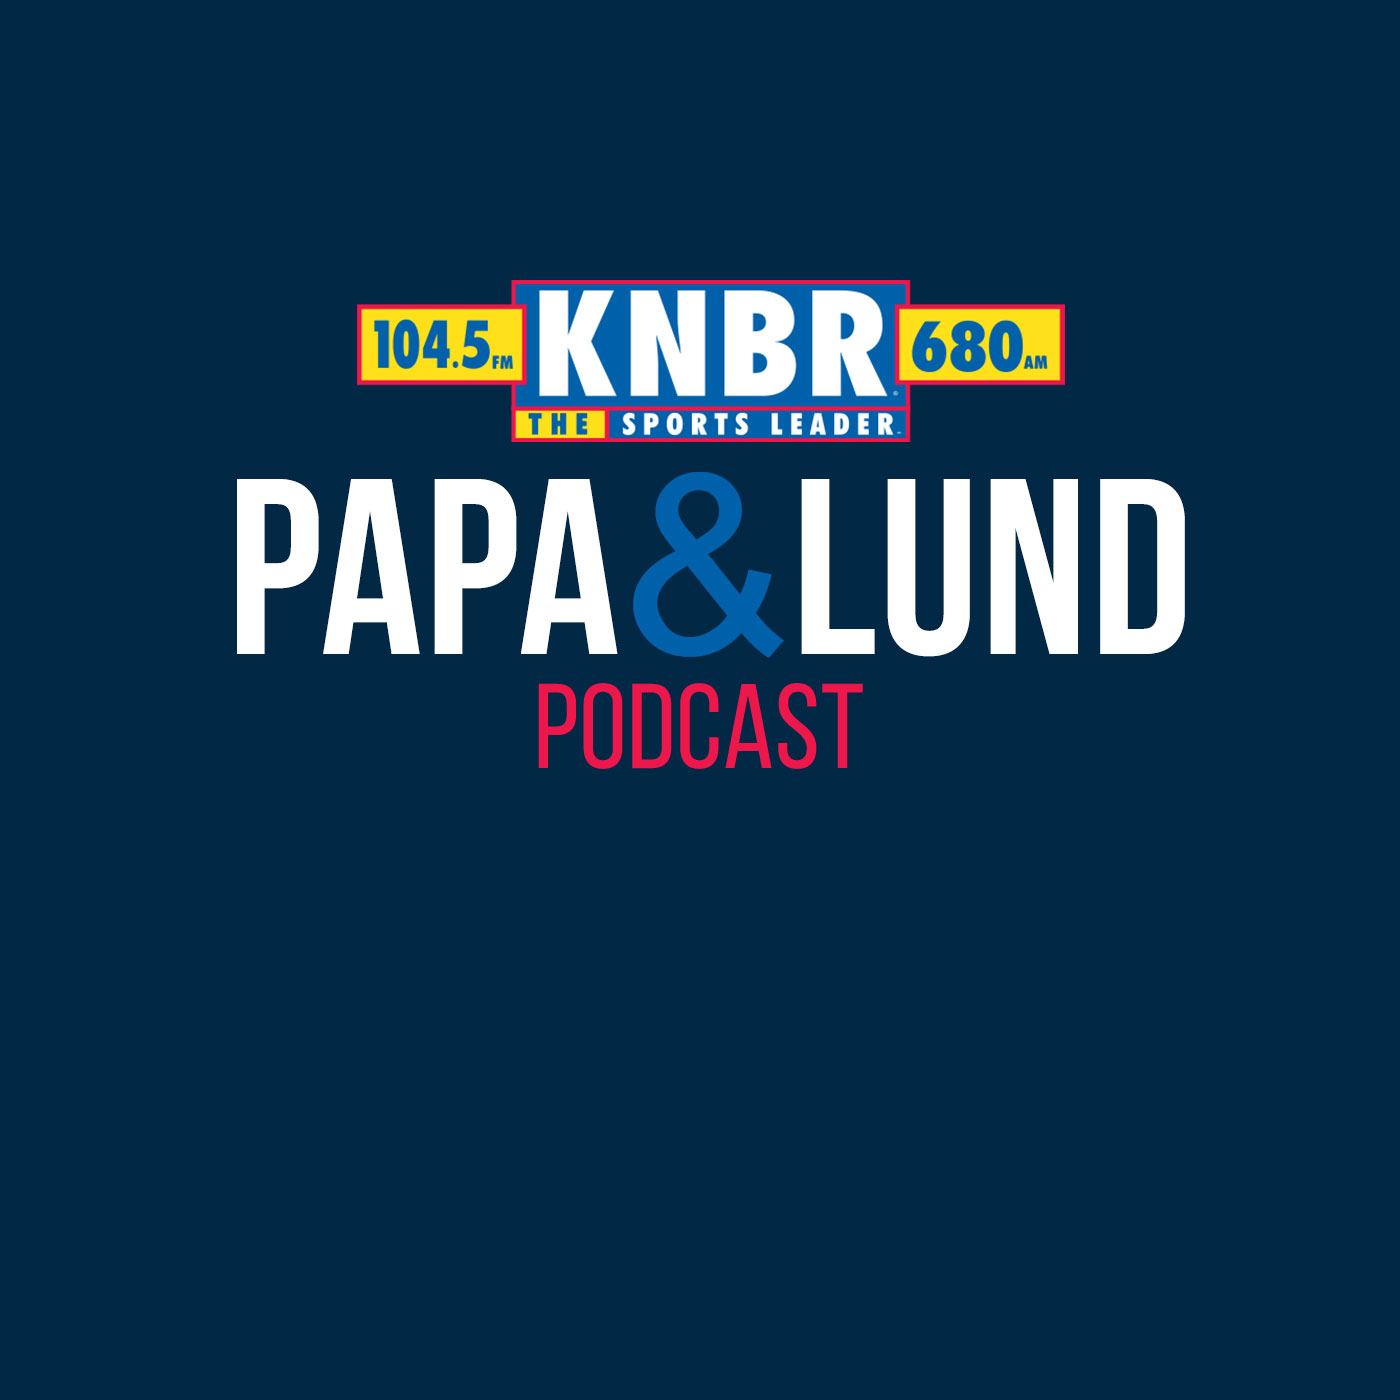 5-1 Michael Wilbon joins Papa & Lund to discuss where Steph Curry should rank All-Time after his 50 point performance in Game 7 against the Kings